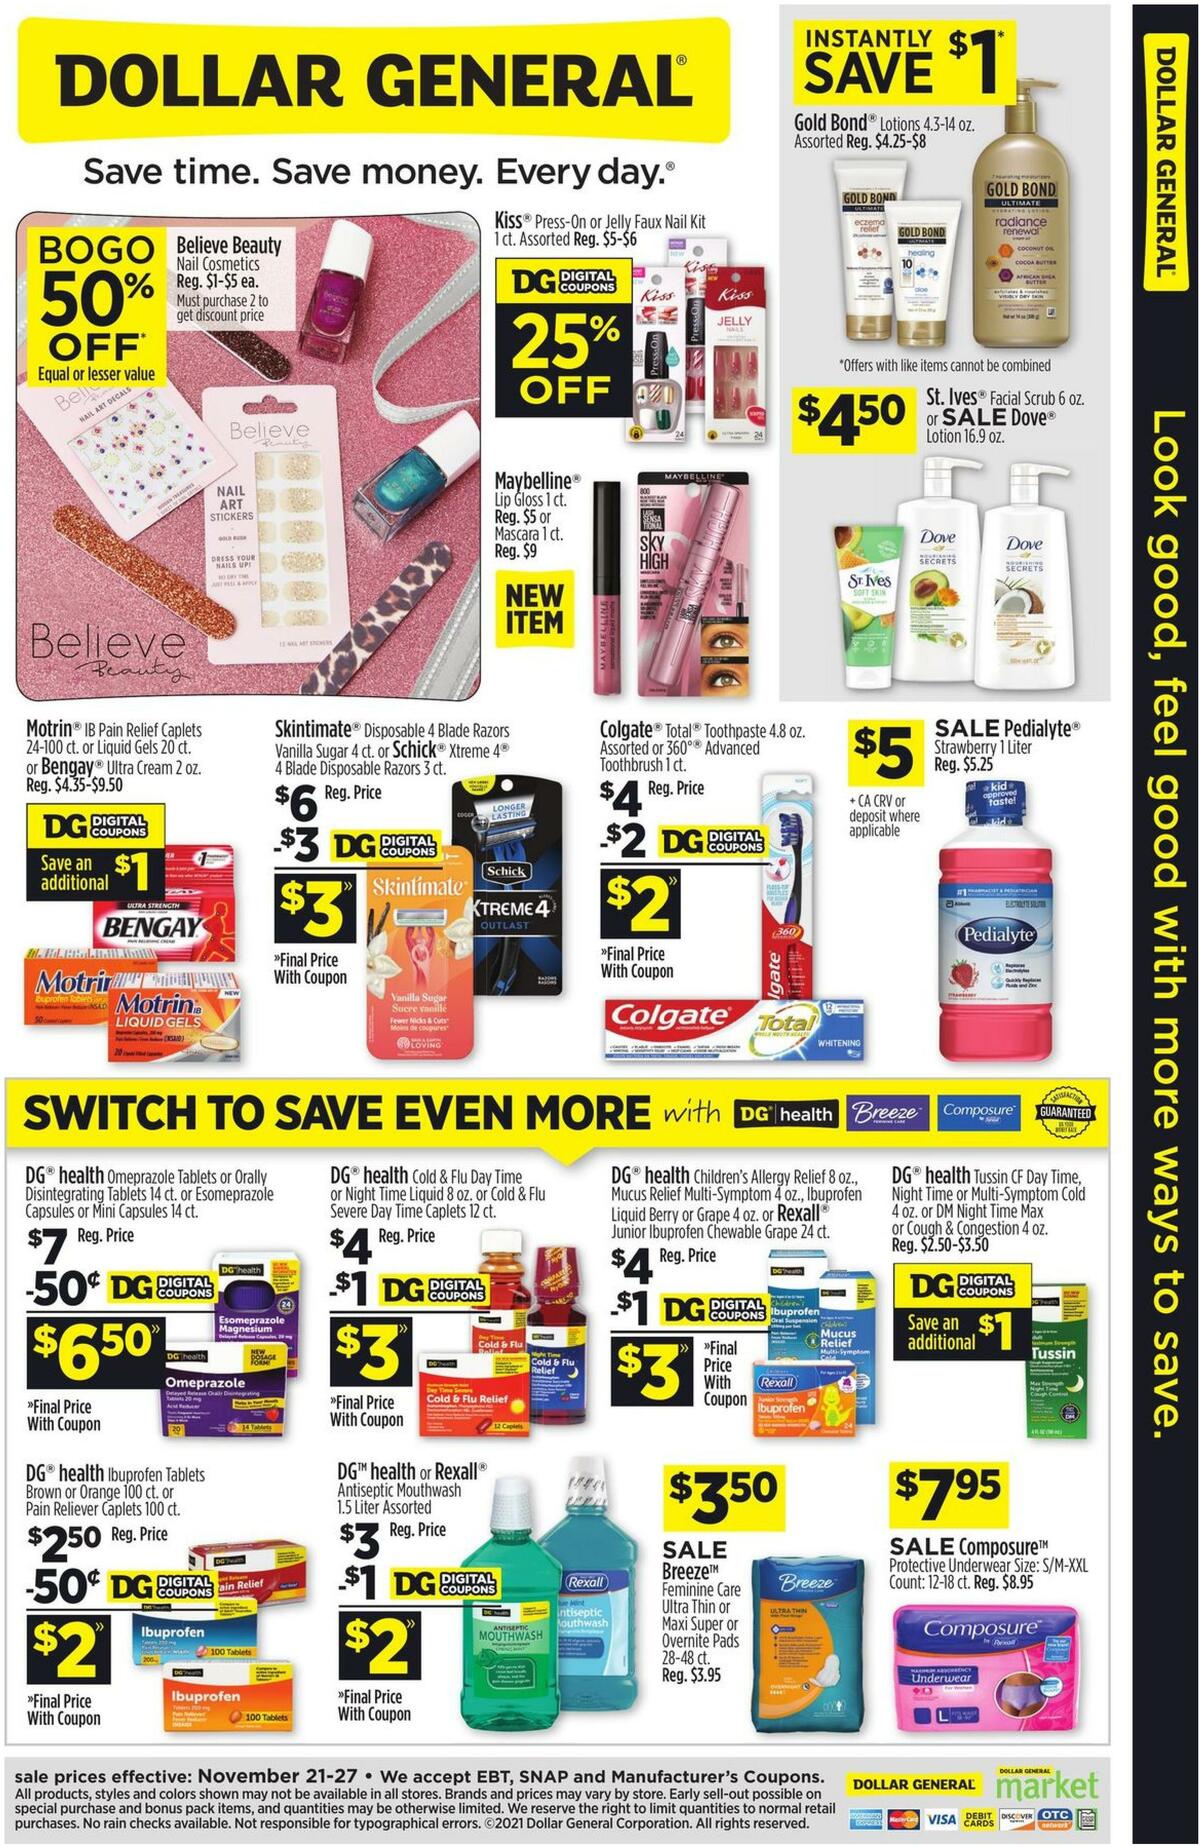 Dollar General Look good, feel good with more ways to save. Weekly Ad from November 21